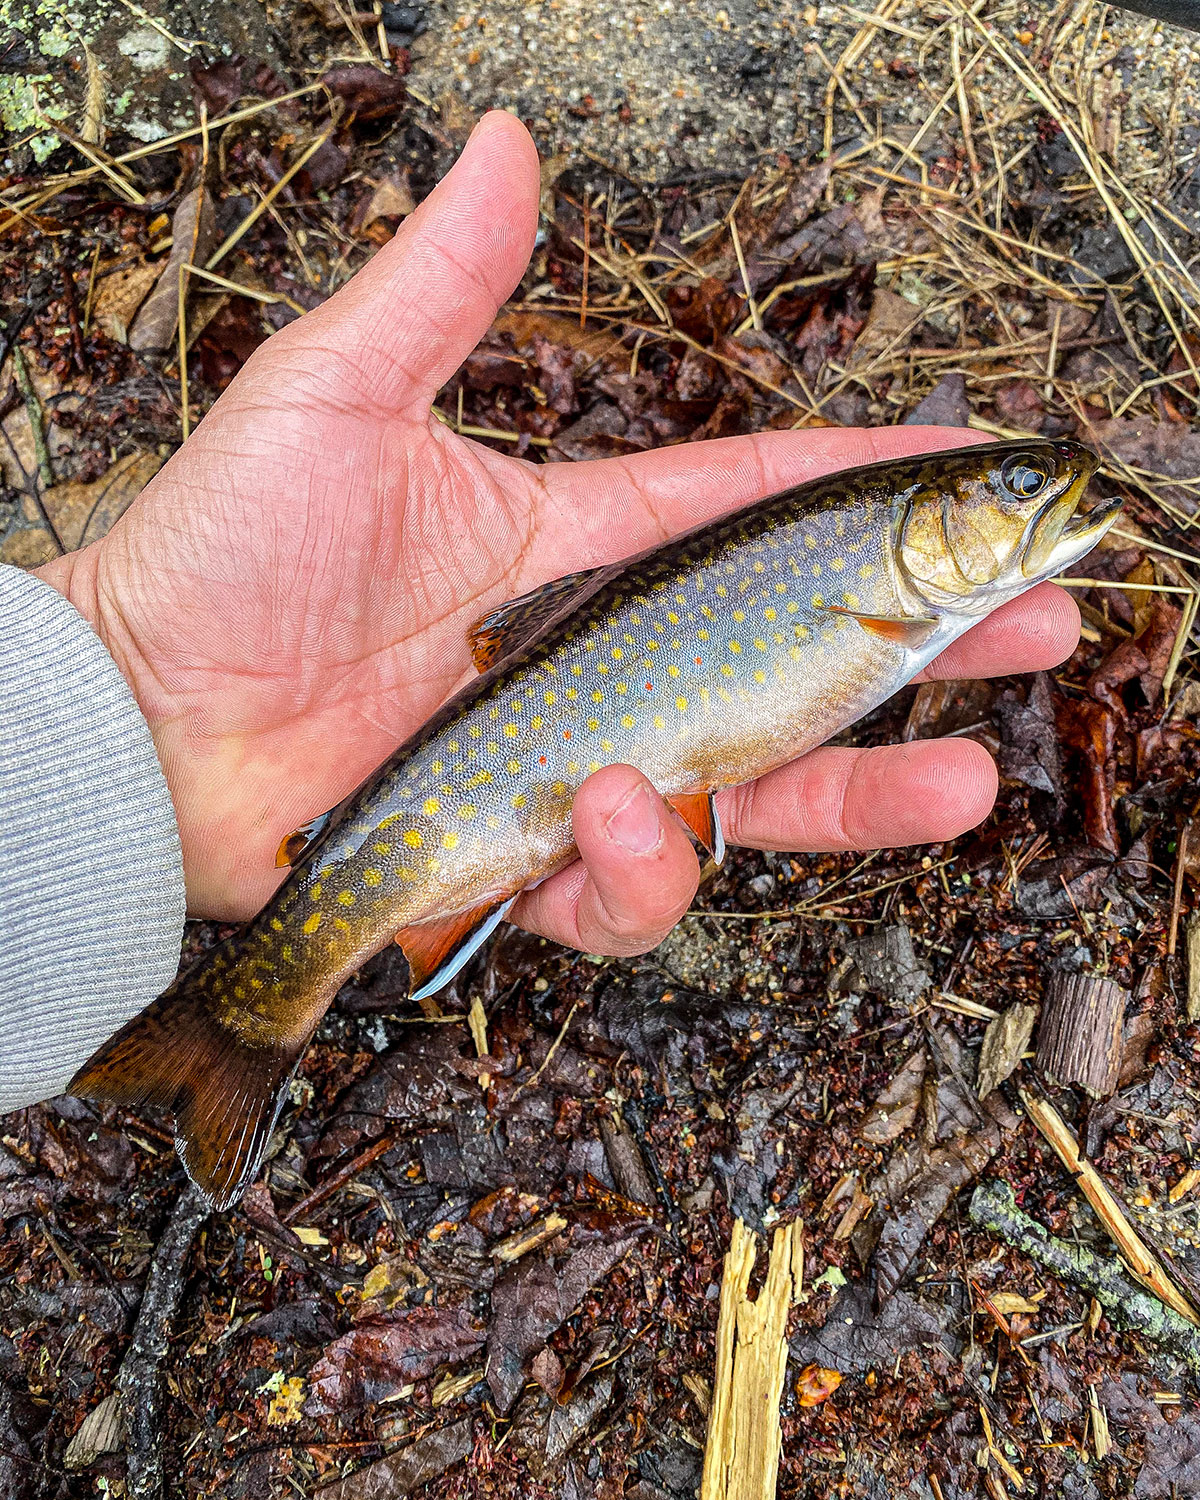 Wading Rivers: A Winter Spin On Trout - The Fisherman